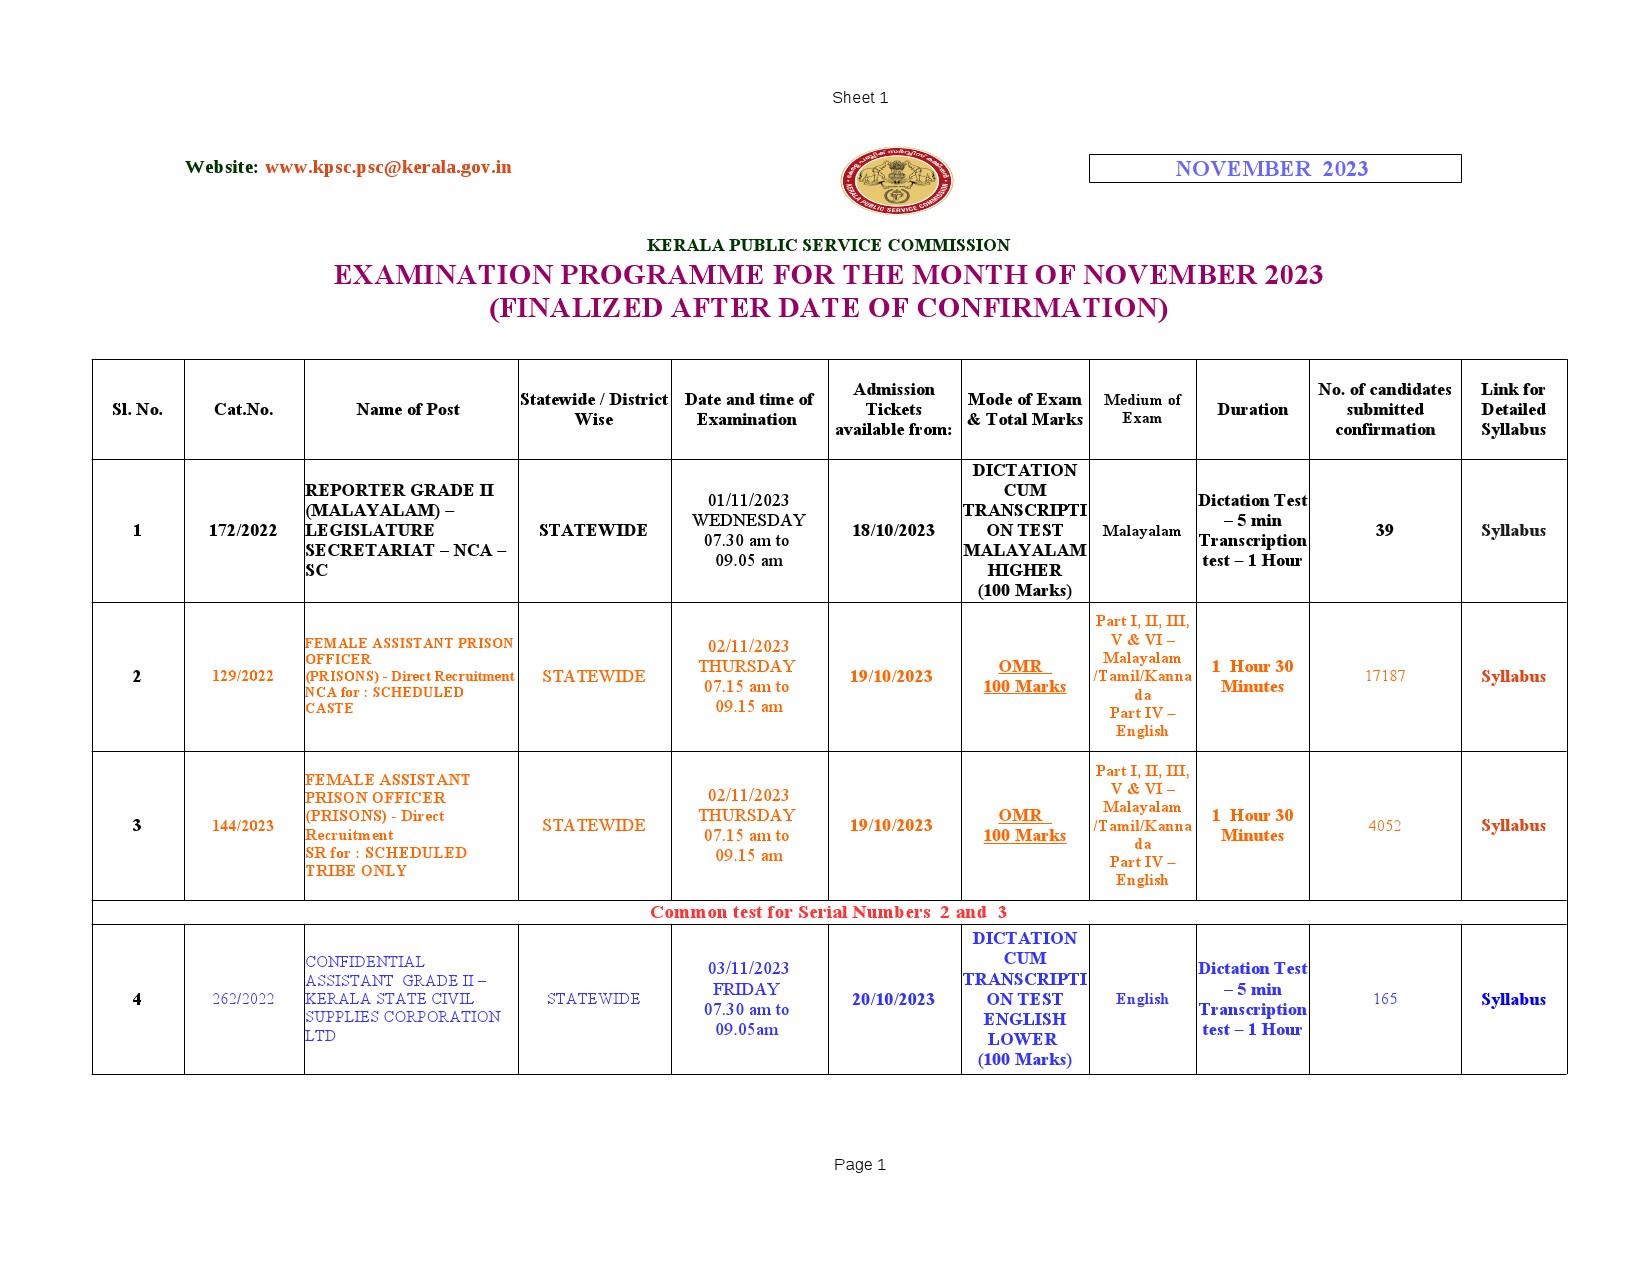 EXAMINATION PROGRAMME FOR THE MONTH OF NOVEMBER 2023 - Notification Image 1